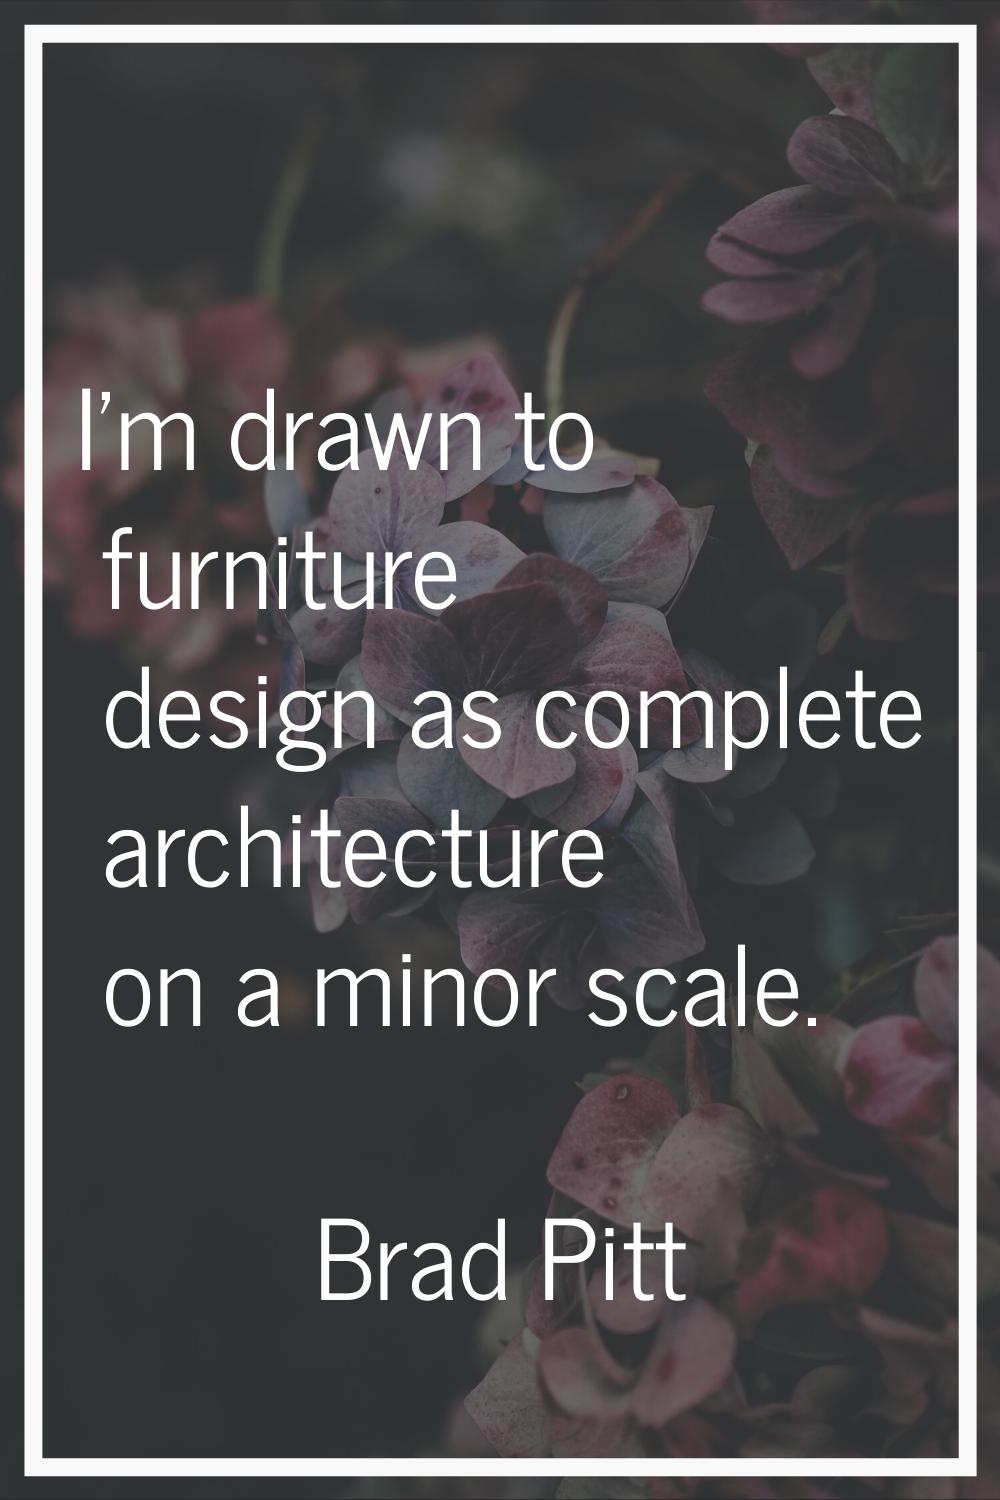 I'm drawn to furniture design as complete architecture on a minor scale.